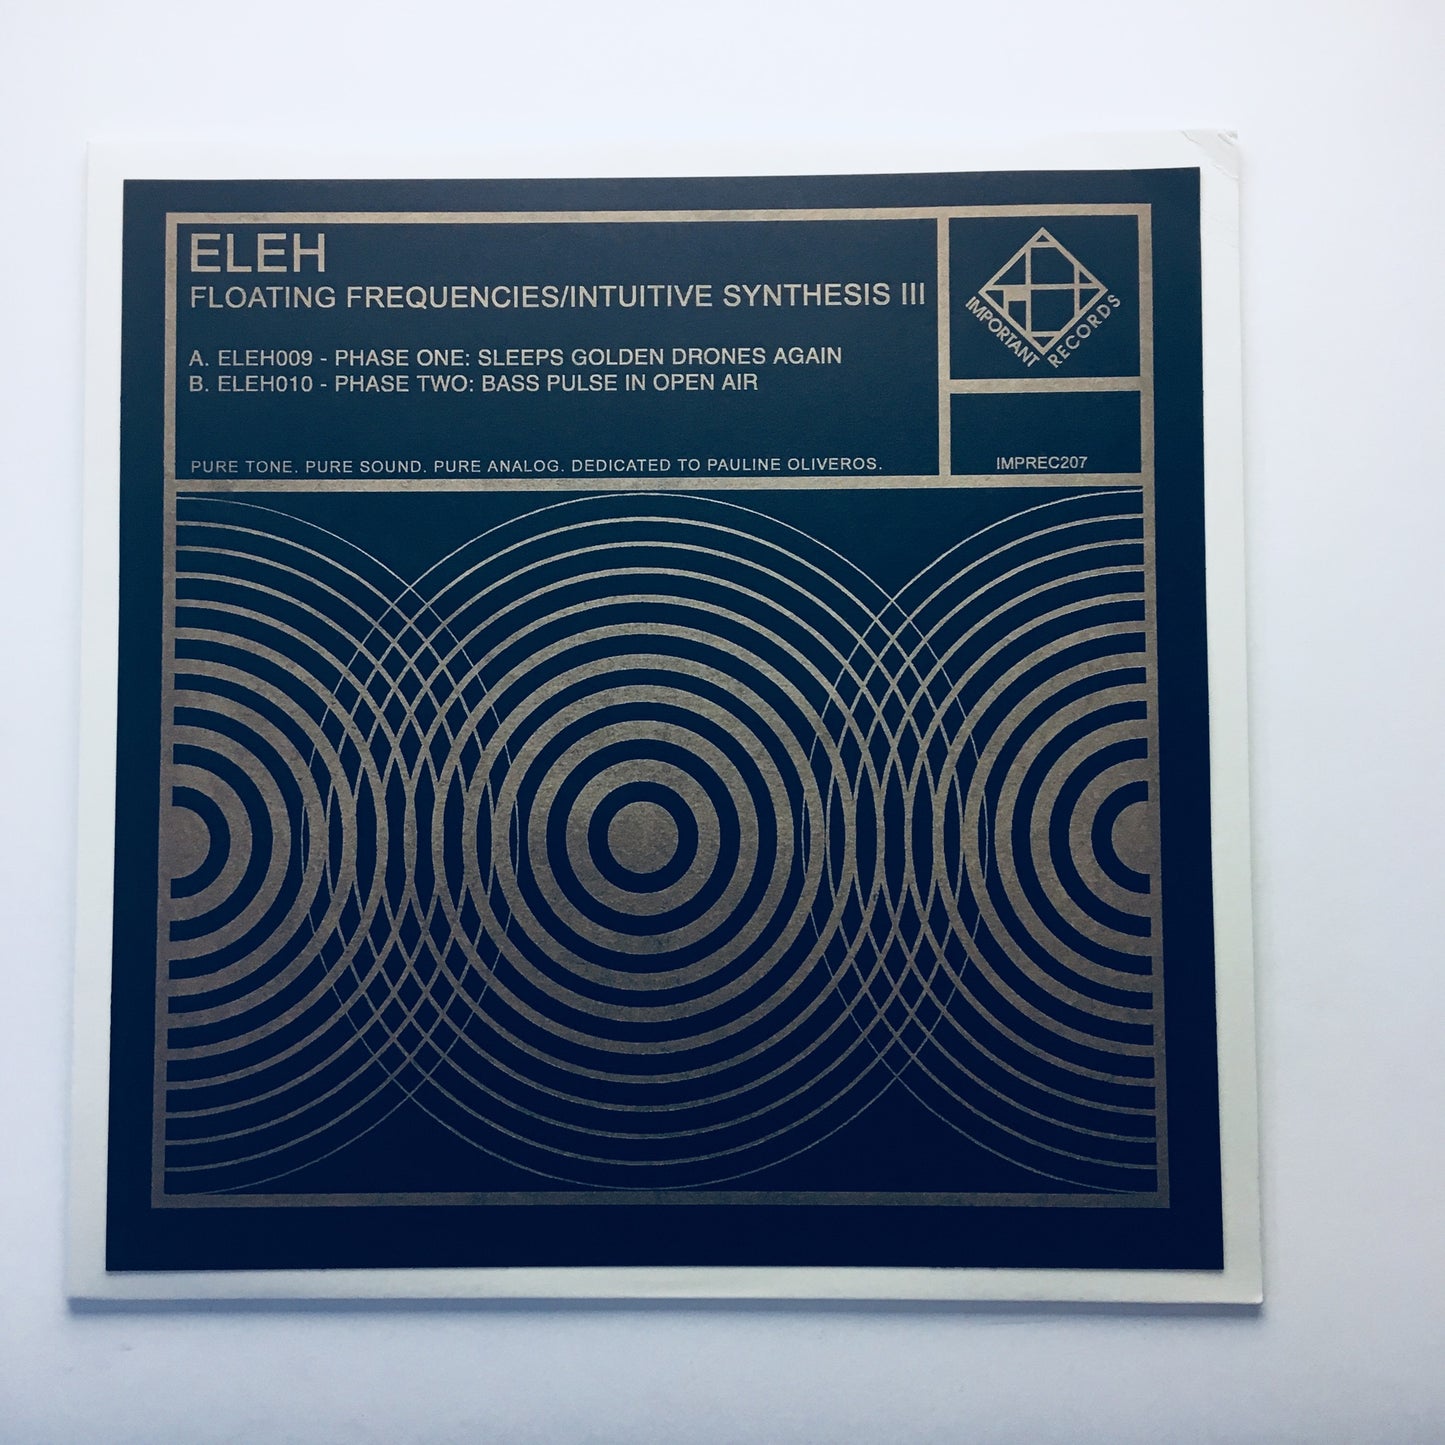 Eleh - Floating Frequencies/Intuitive Synthesis, Volume III - LP